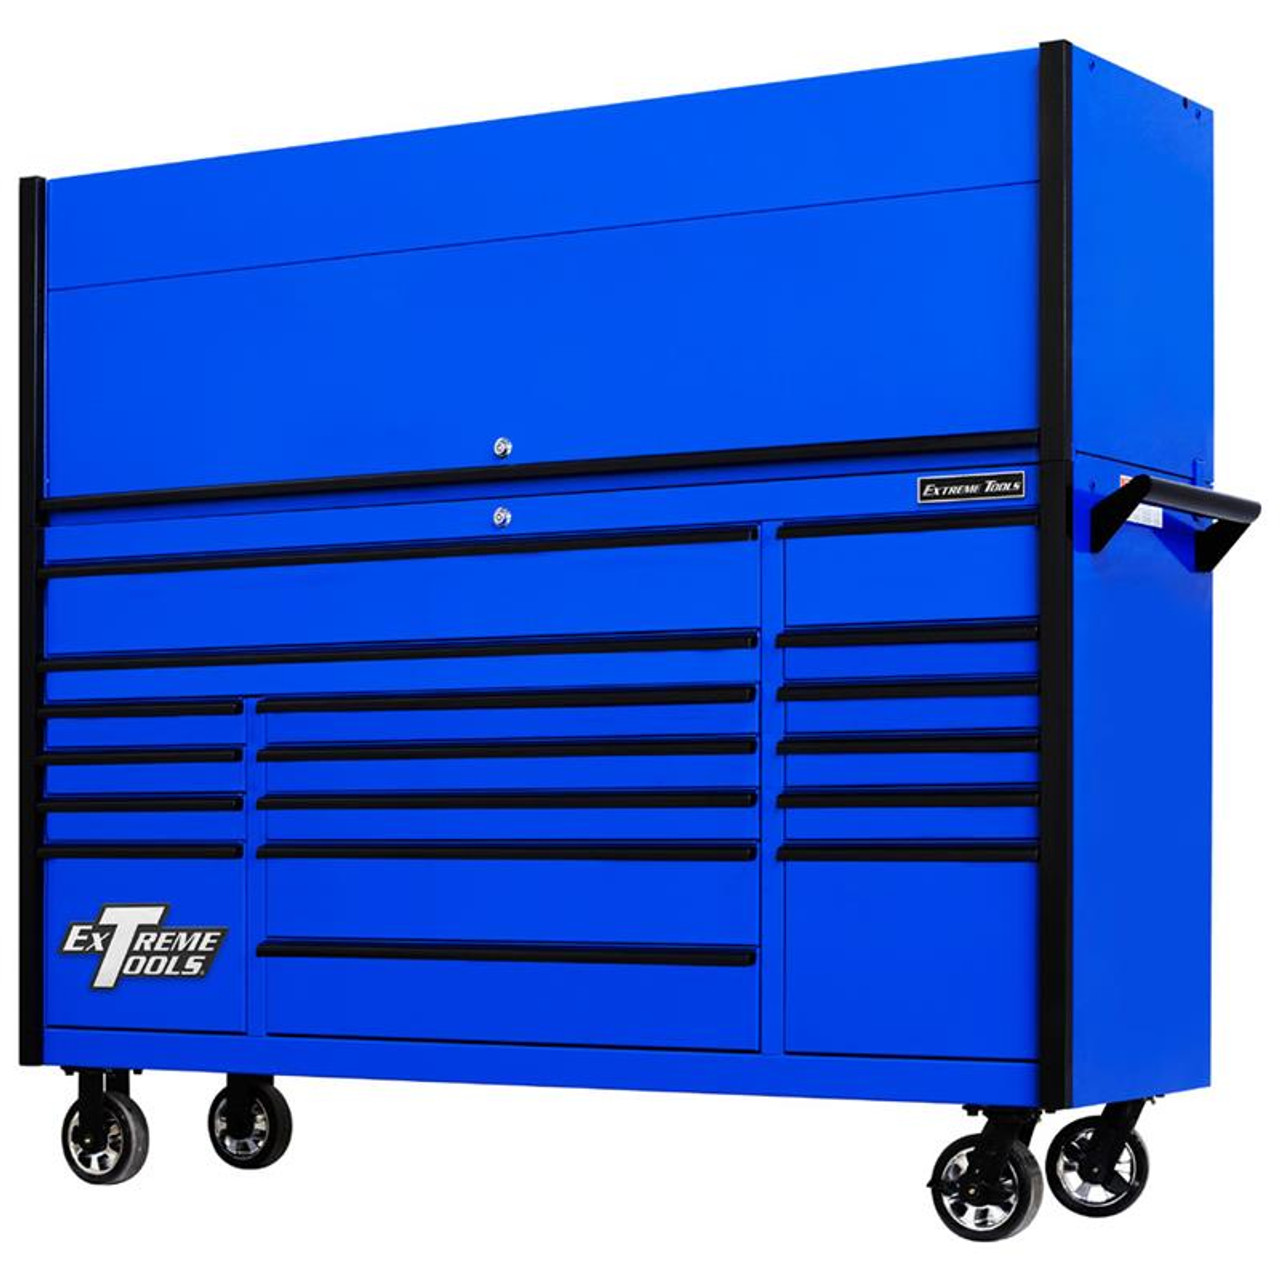 Extreme Tools DX7218HRUK Combo - DX Series 72", 17 Drawer, 21" Deep Roller Cabinet and Matching Hutch - Blue with Black Drawer Pulls